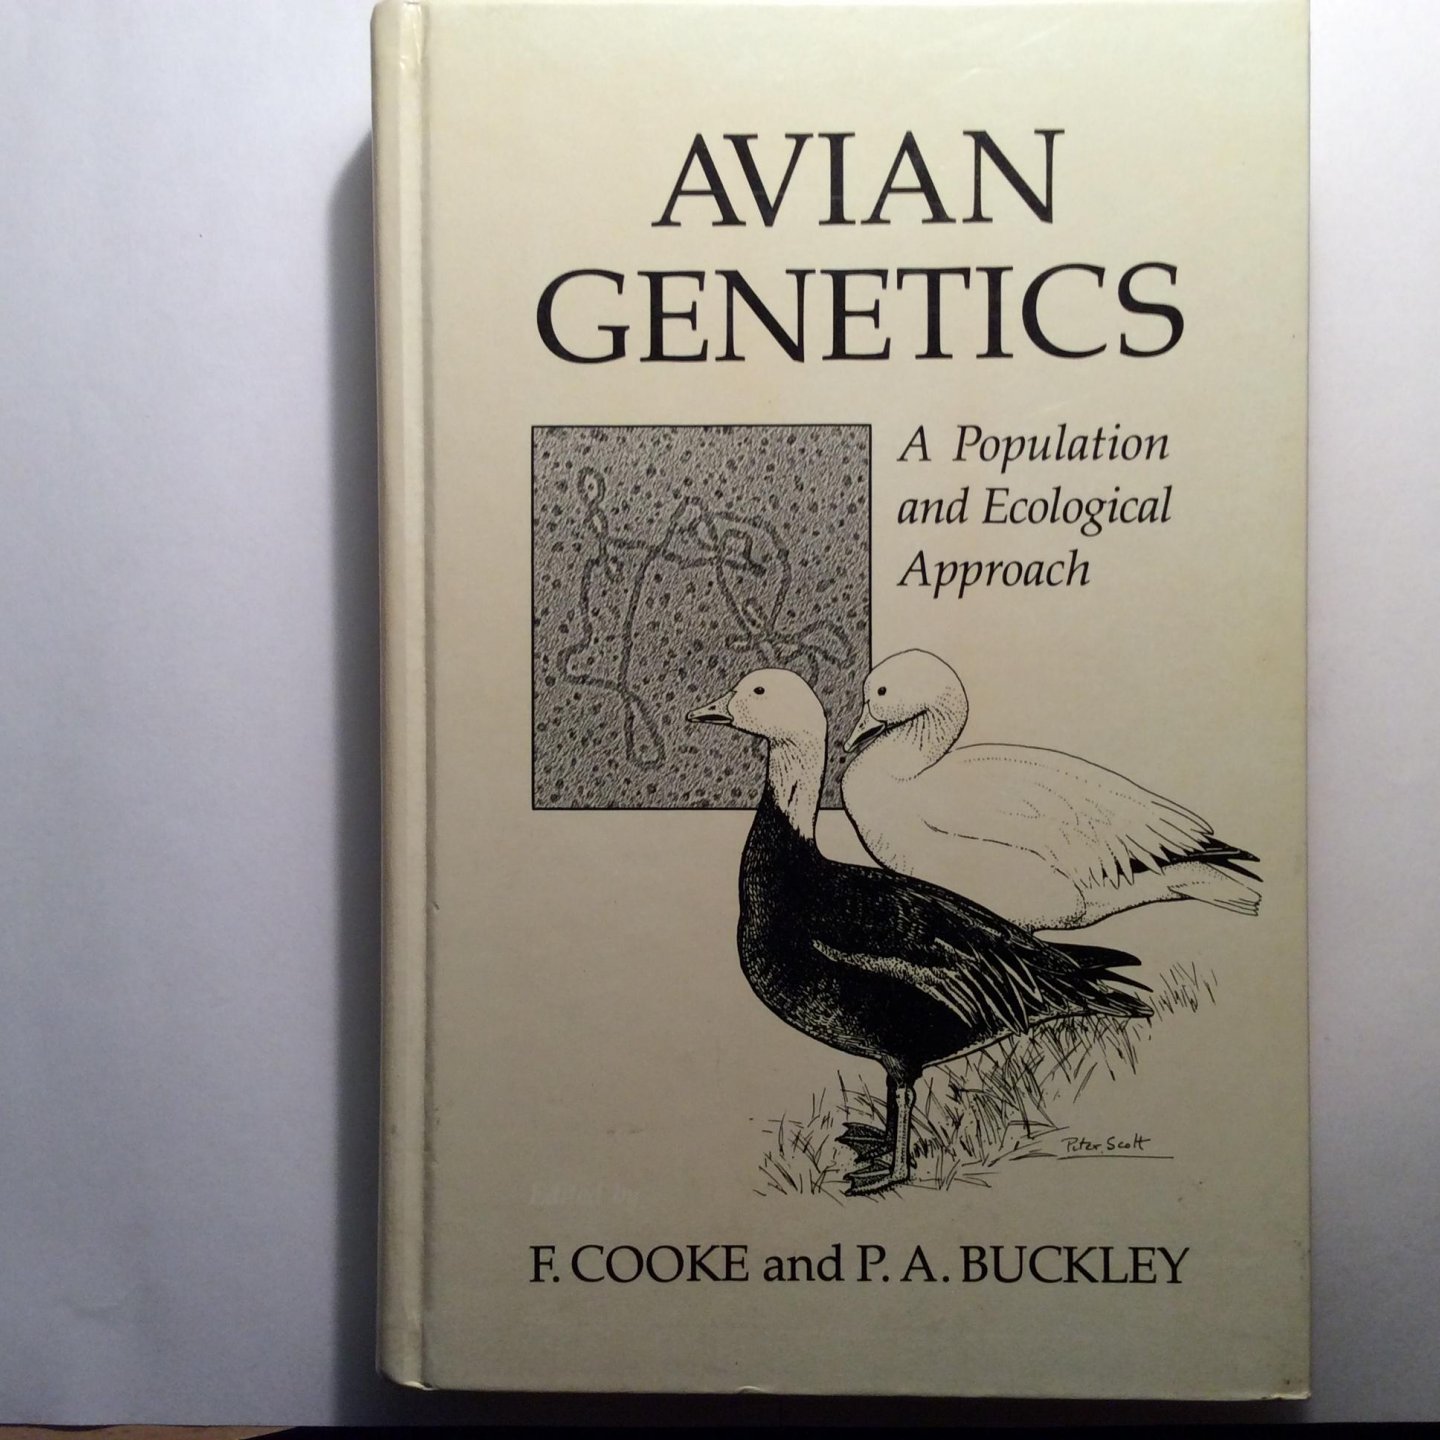 Cooke, F. and Buckley, P.A. - Avian Genetics ; A Population and Ecological Approach